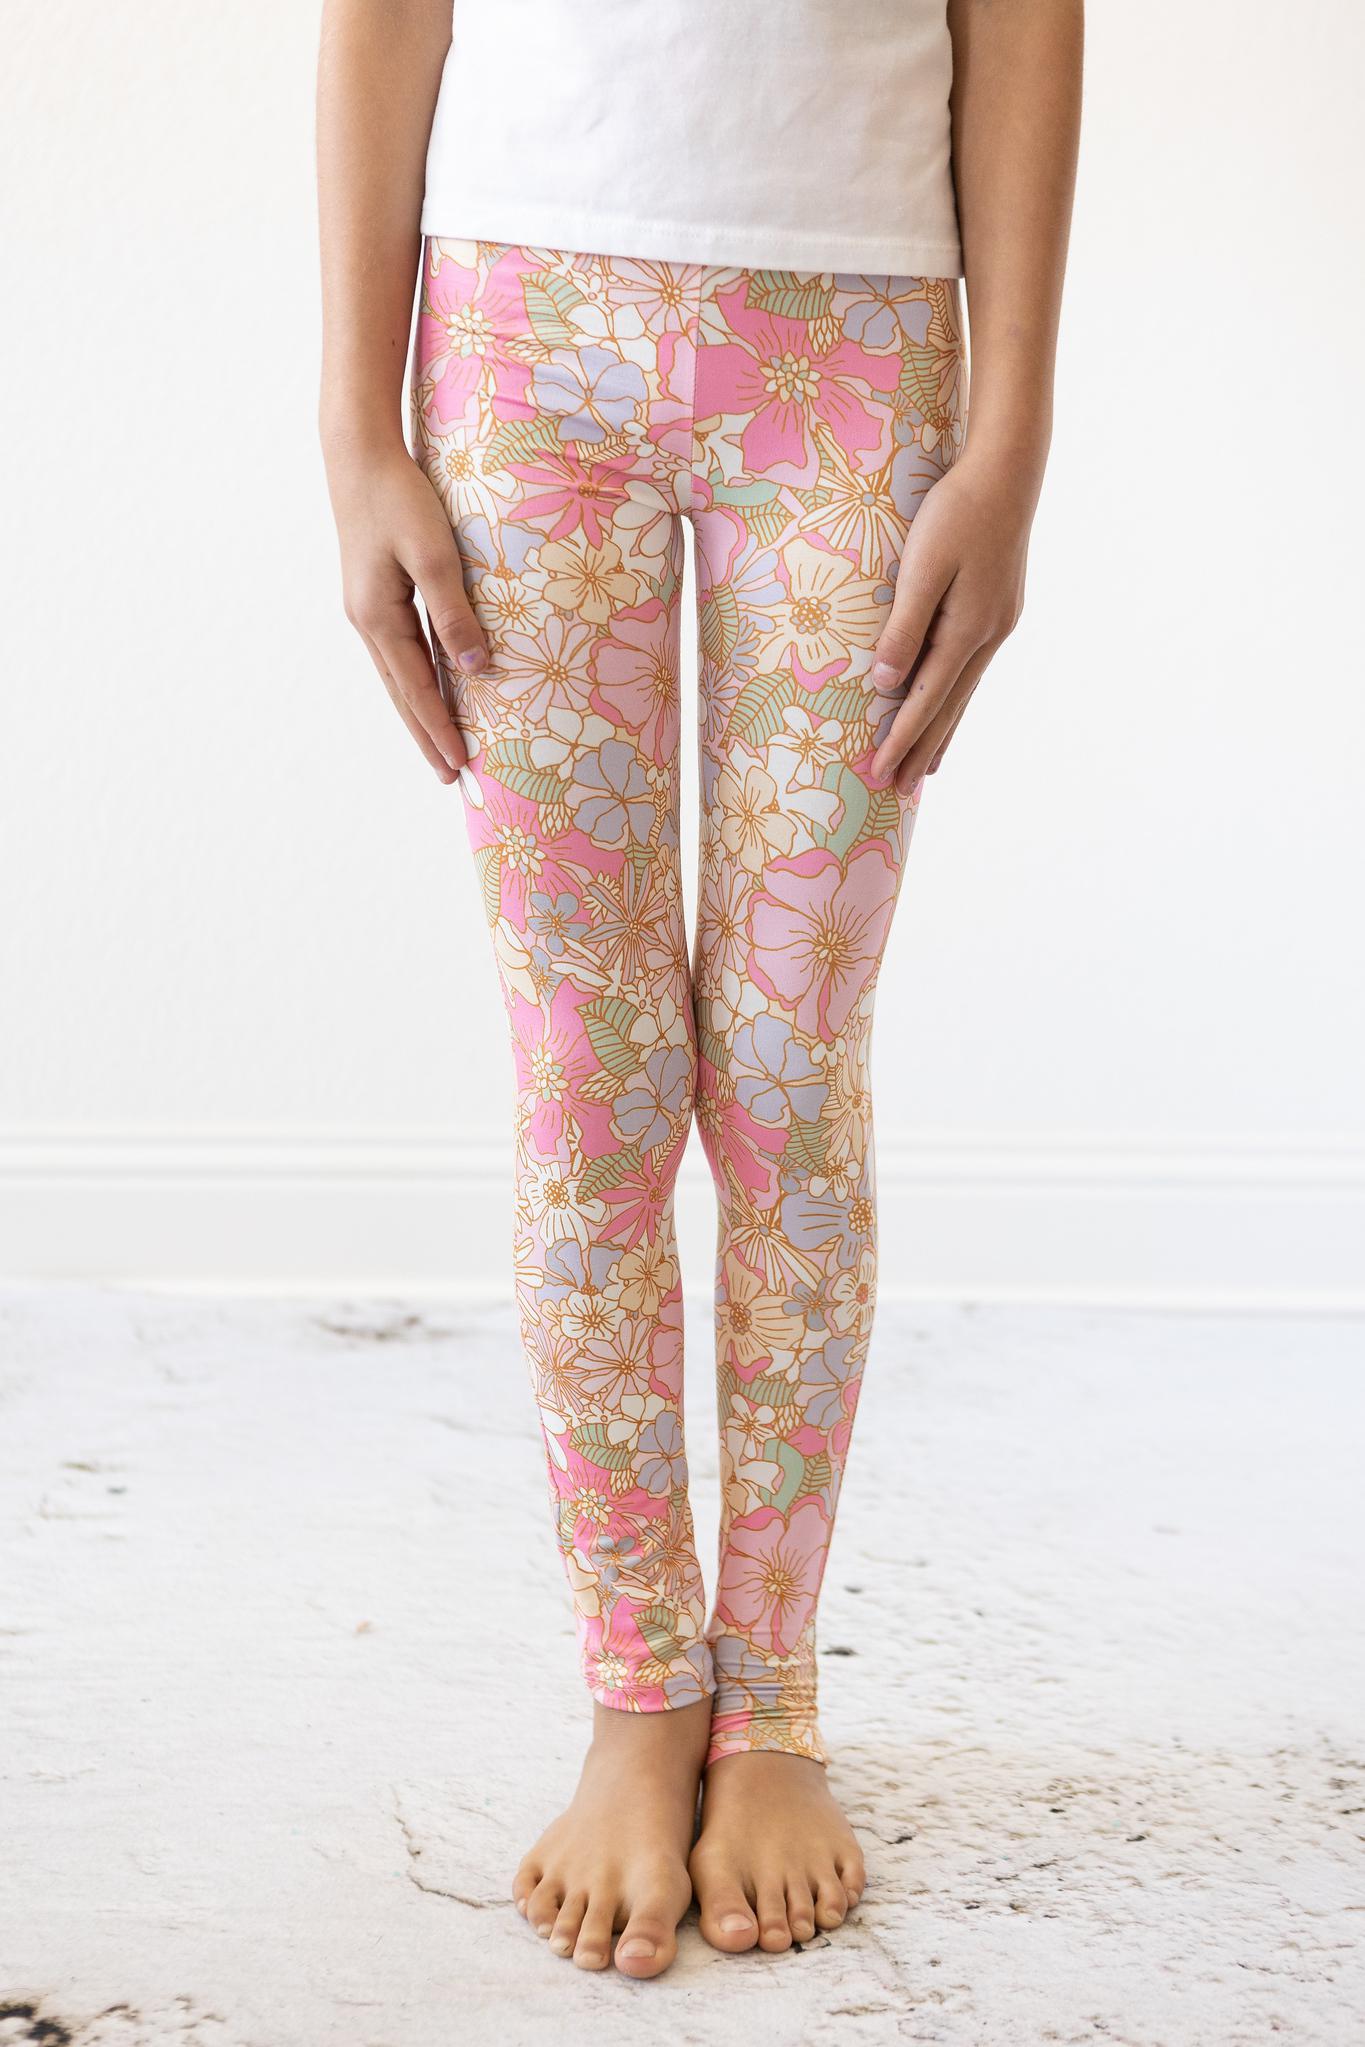 What's Up Buttercup Leggings - Mila & Rose ®